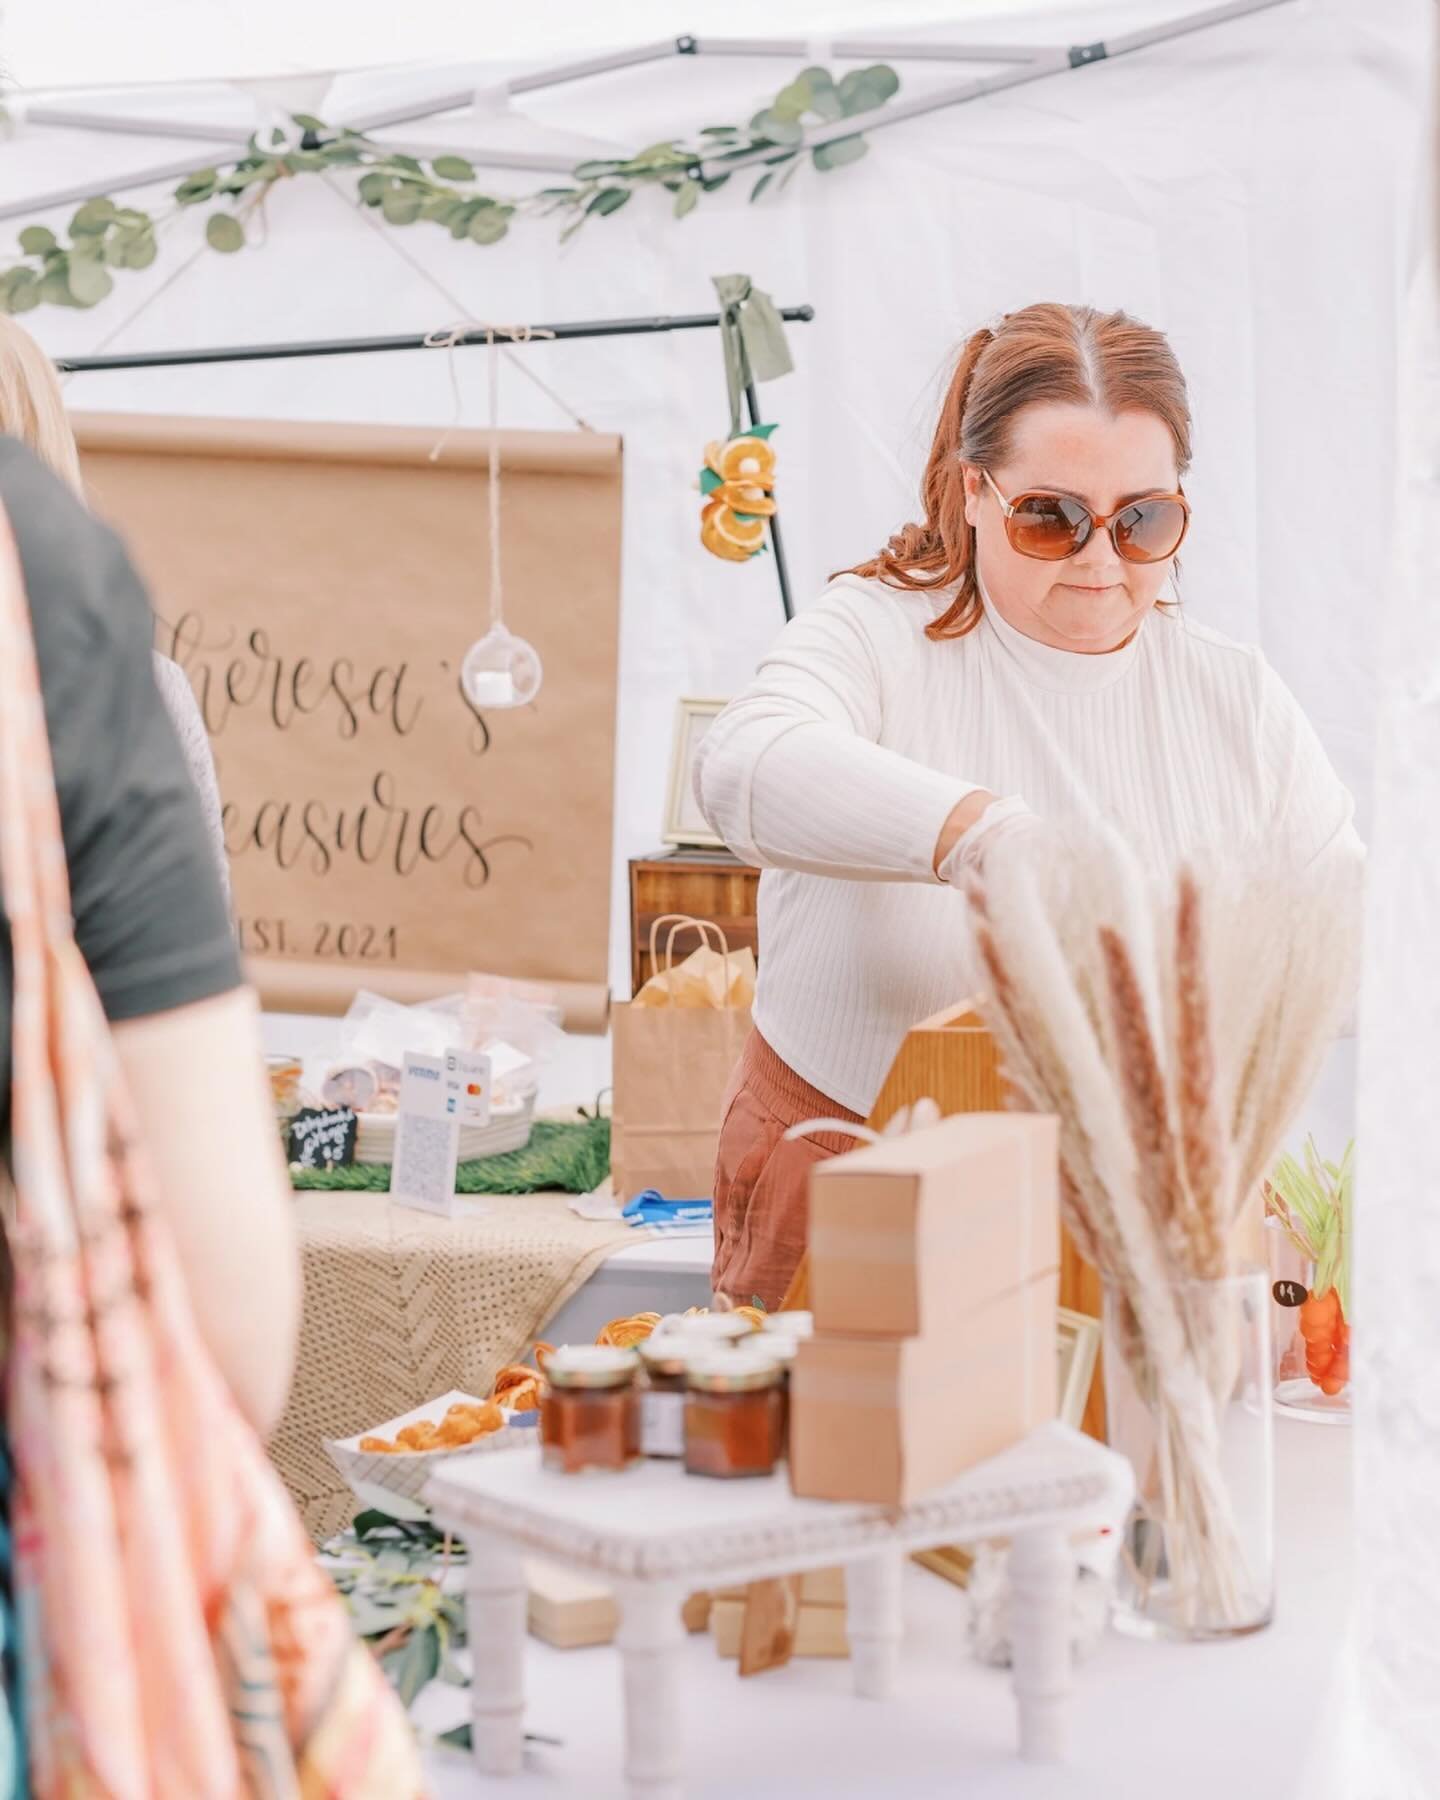 Mark your calendars for the Craftery Market happening at Dublin Town Center on May 11th from 10am-3pm. 20+ vendors, food, drinks, and live music. What a perfect way to spend Mother&rsquo;s Day Weekend!

✨ @thecrafterypa 

.
.
#ThingsToDoInBucksCounty